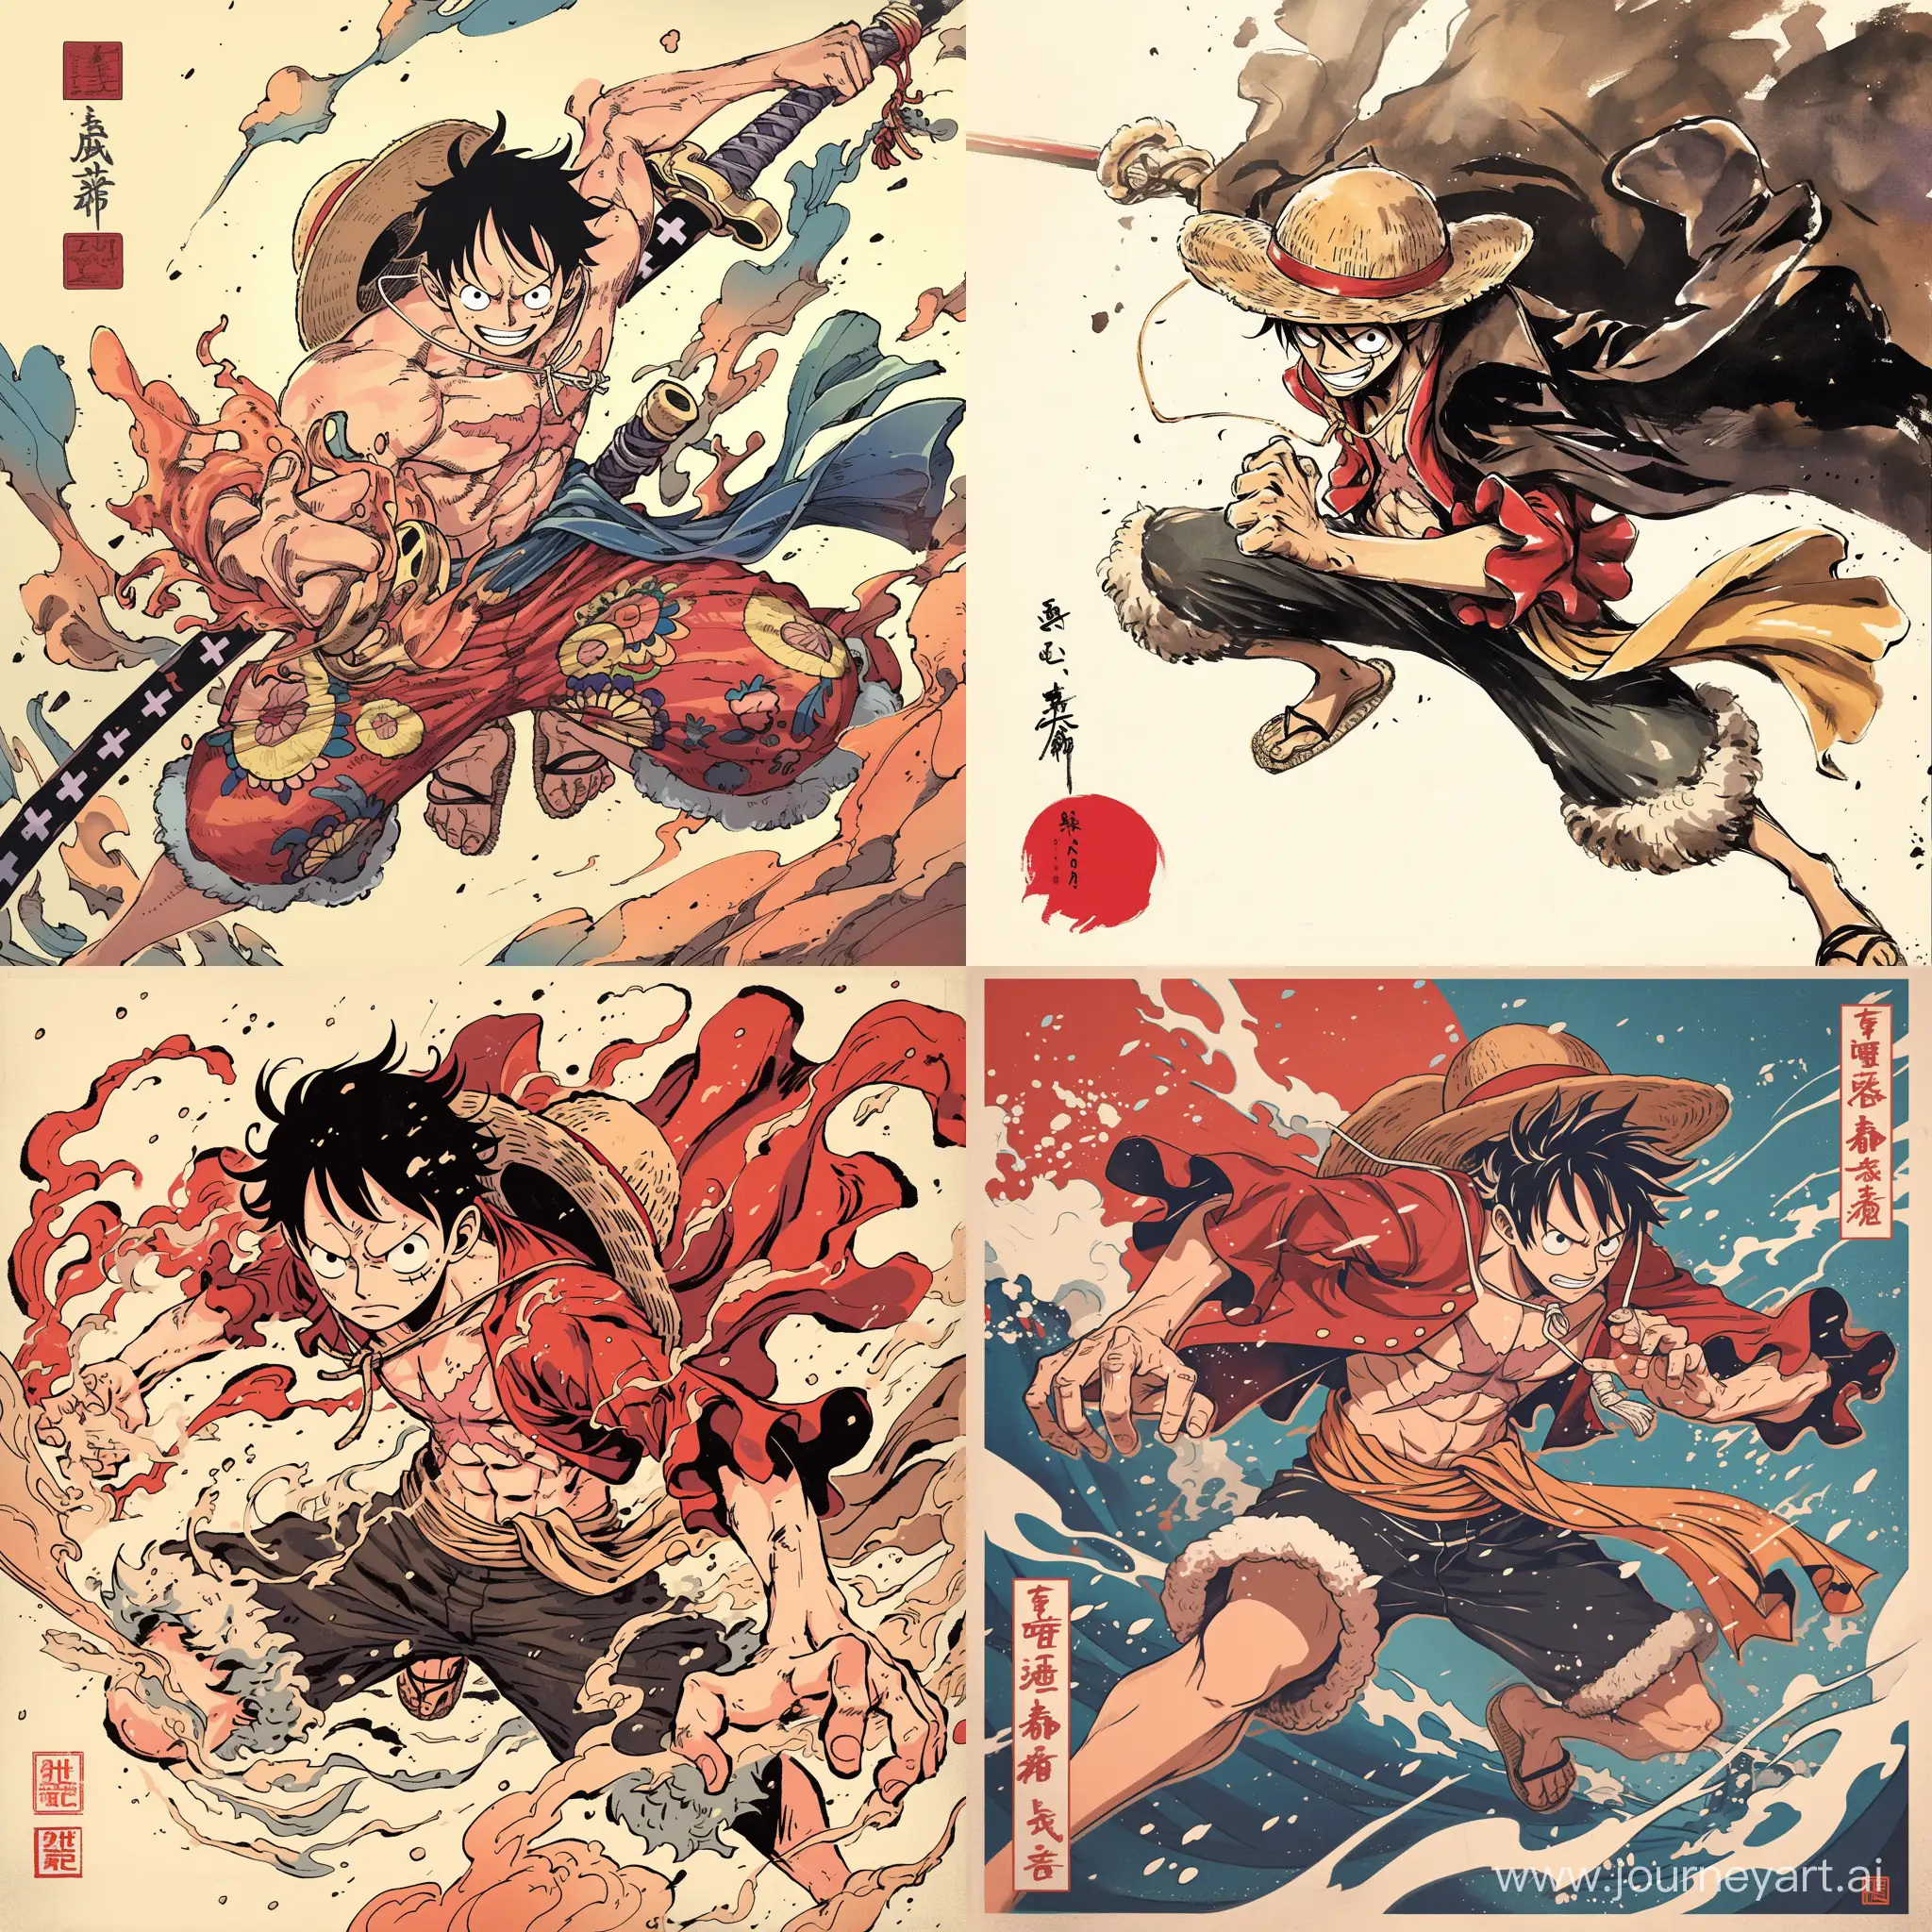 Monkey-D-Luffy-from-One-Piece-Heroic-Sumie-Ink-Poster-Design